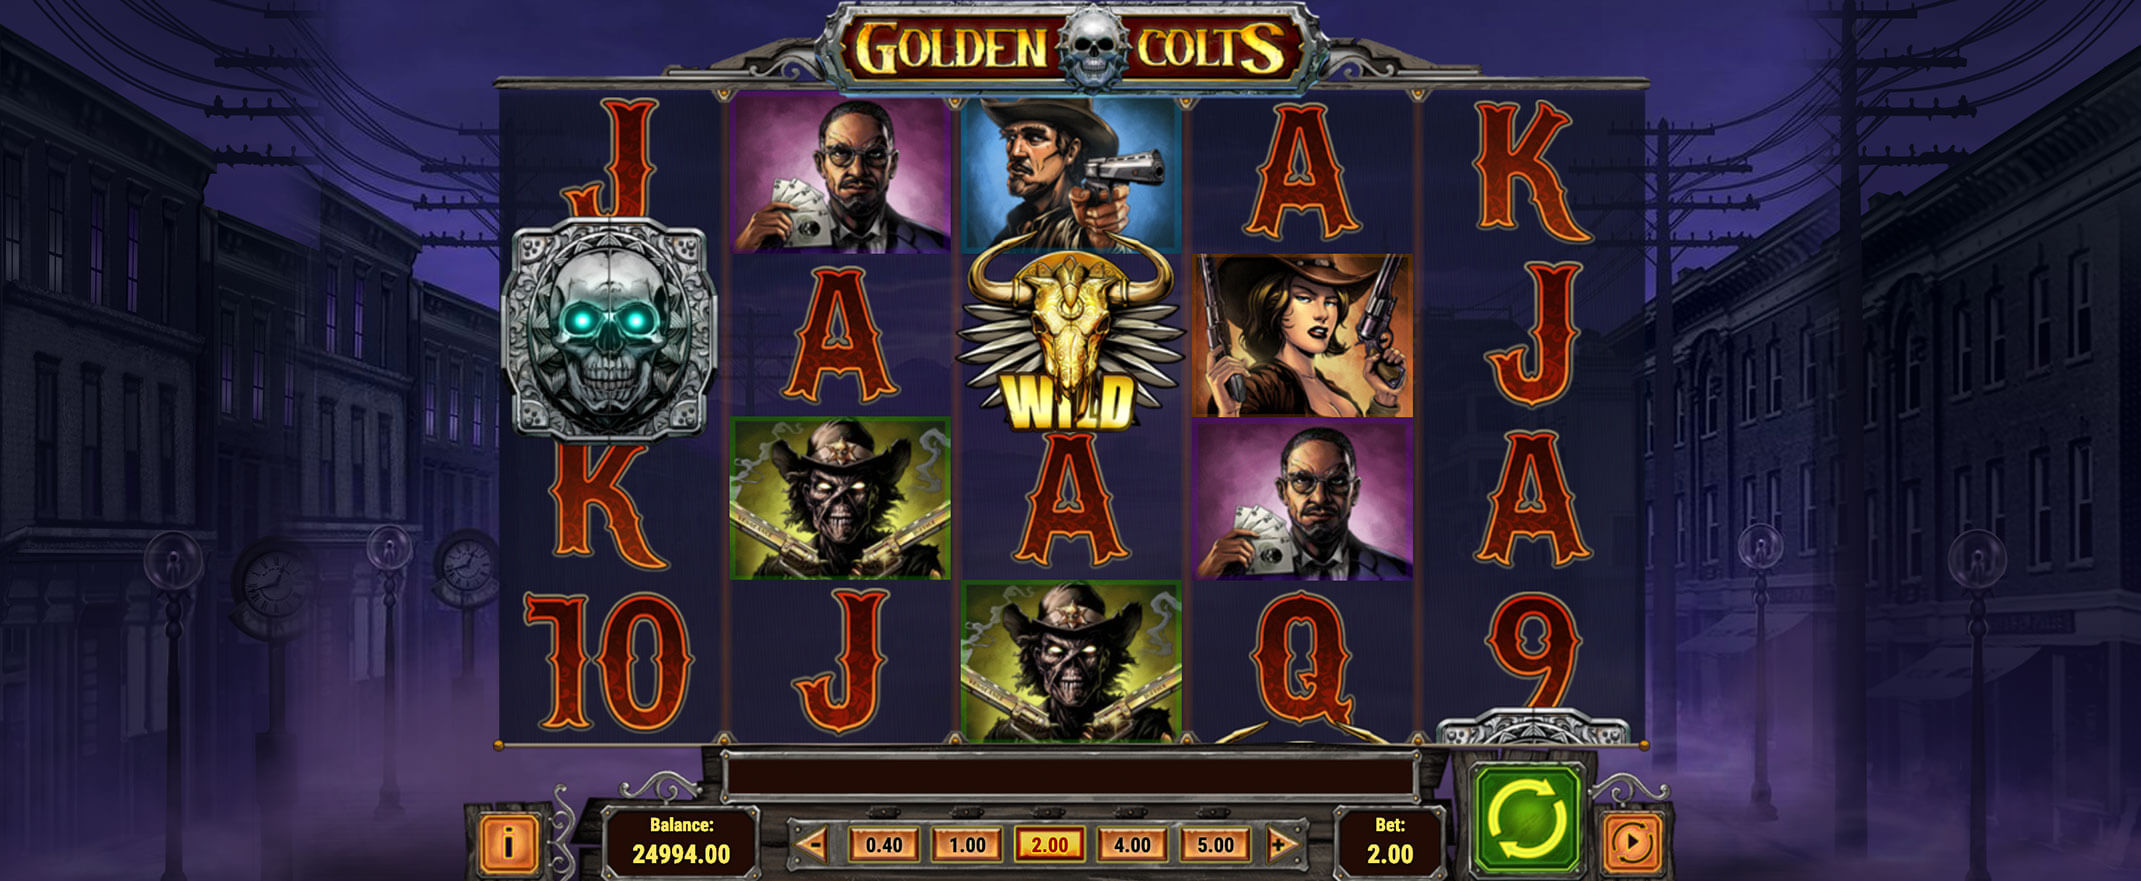 Golden Colts video slot from Play'n Go